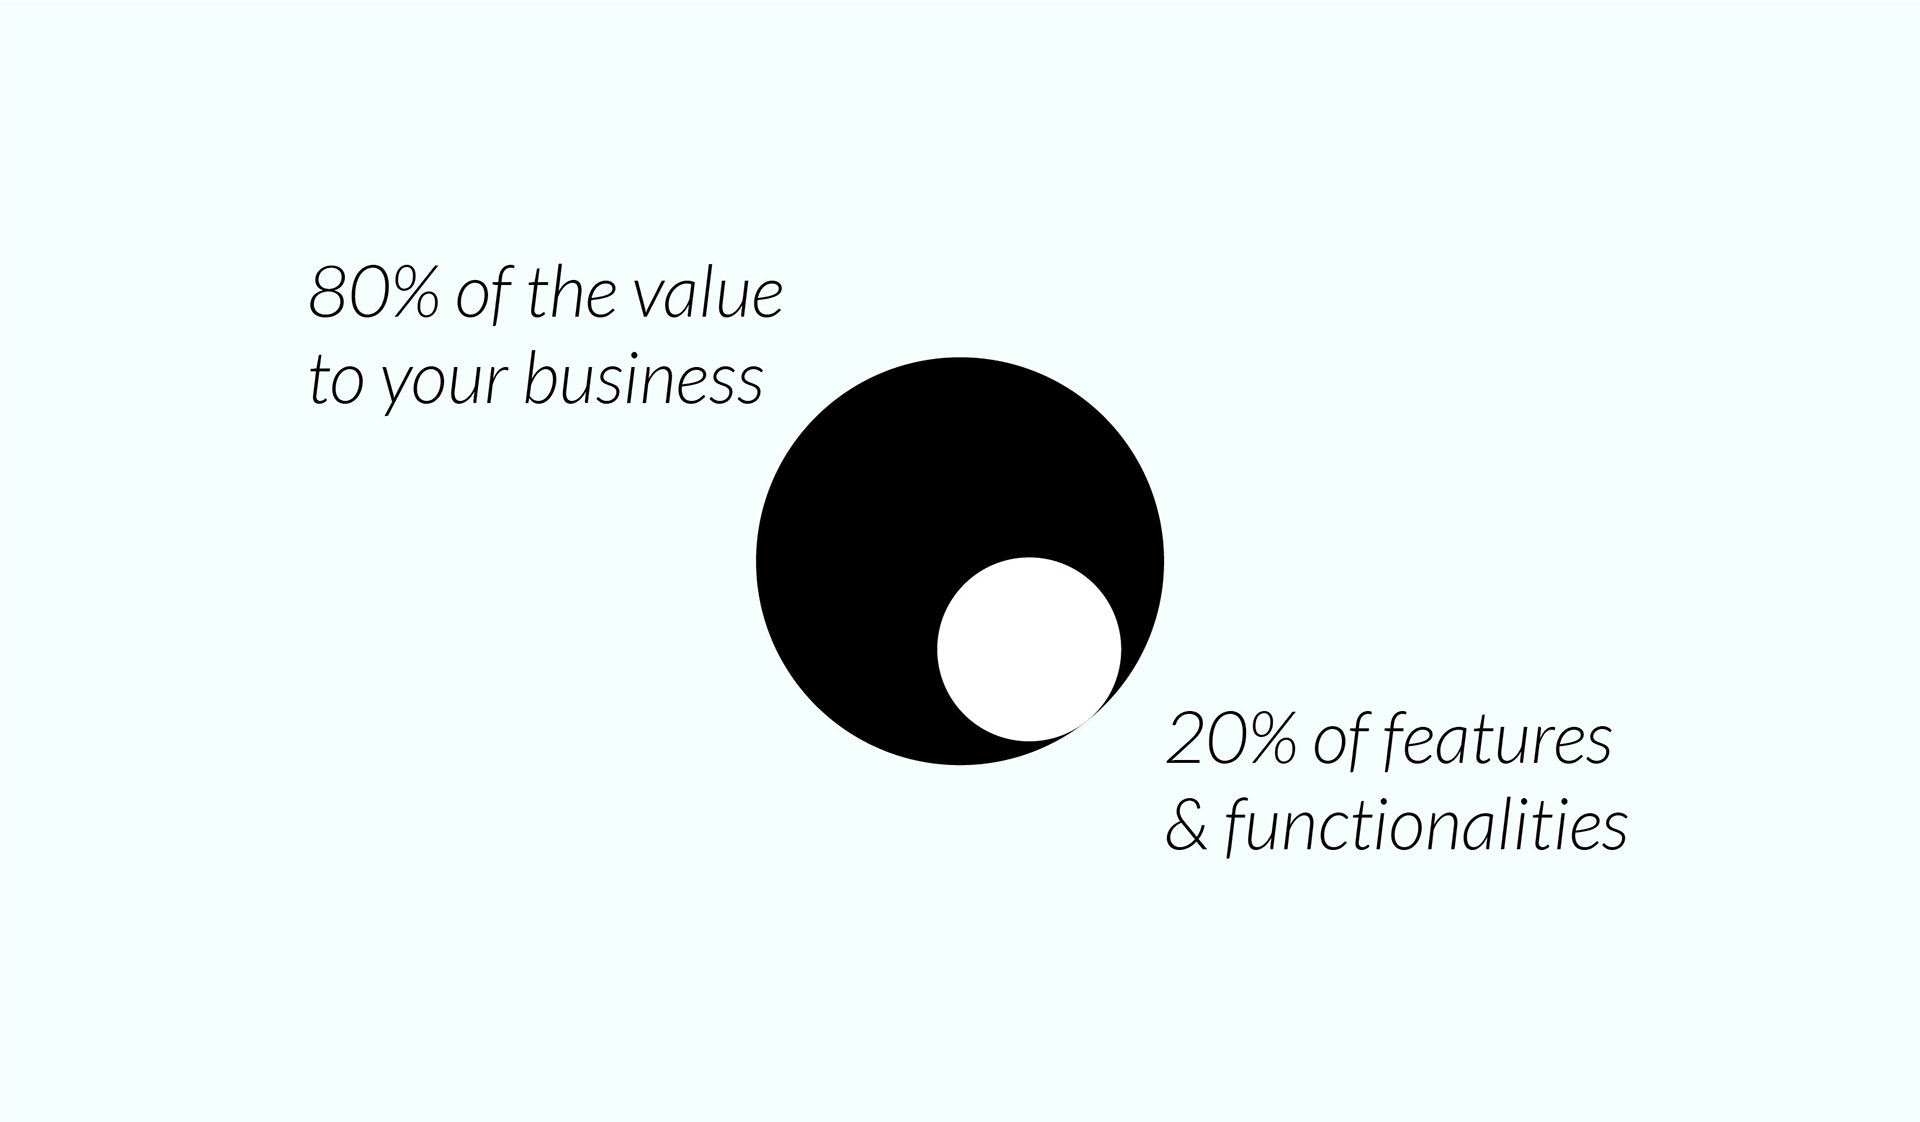 A graphics on 80/20 rules where 80% means the value added to a business and 20% means use of features and functionalities